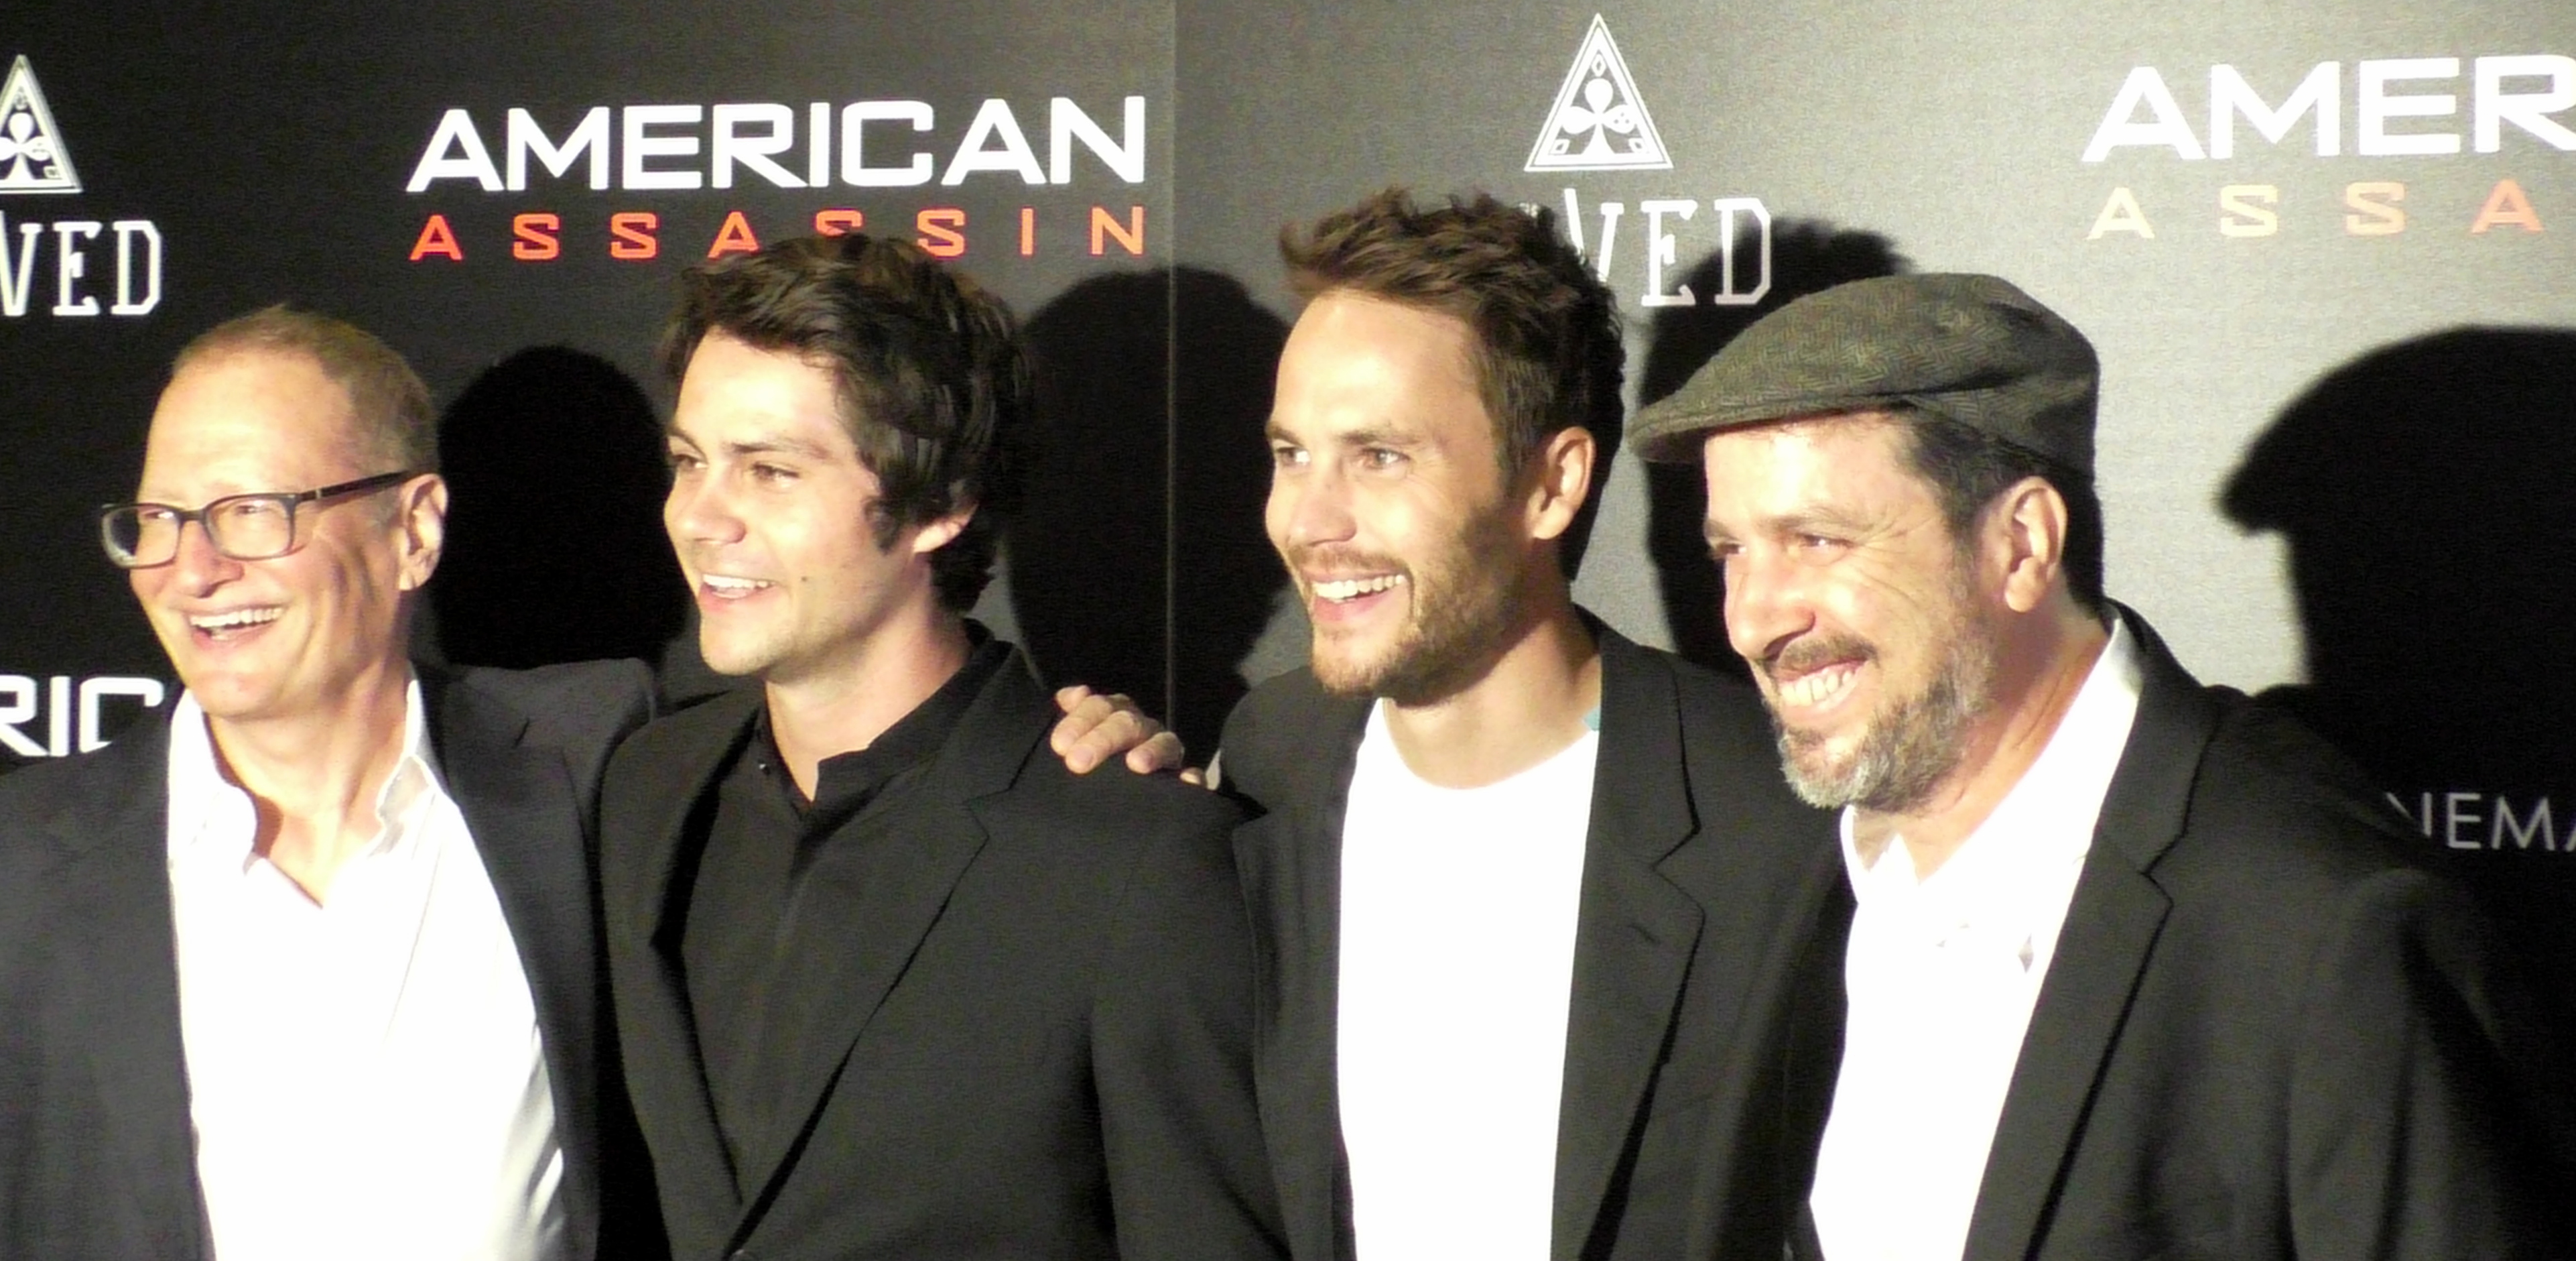 The Stars Shine at the “American Assassin” Premiere in New York City